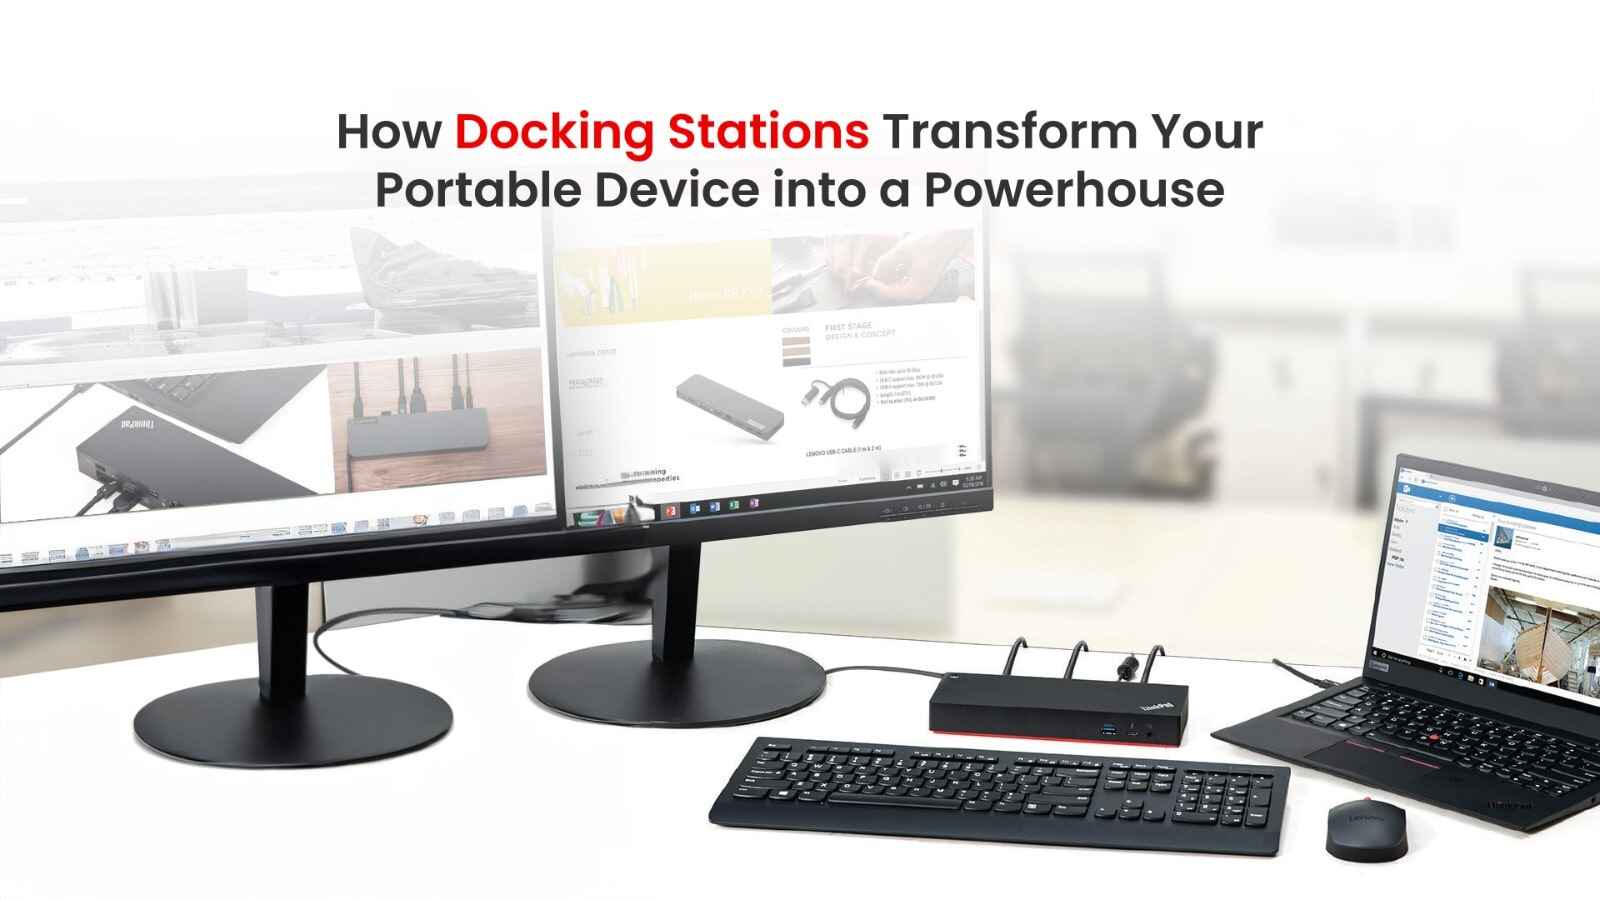 Docking Stations for Portable Devices